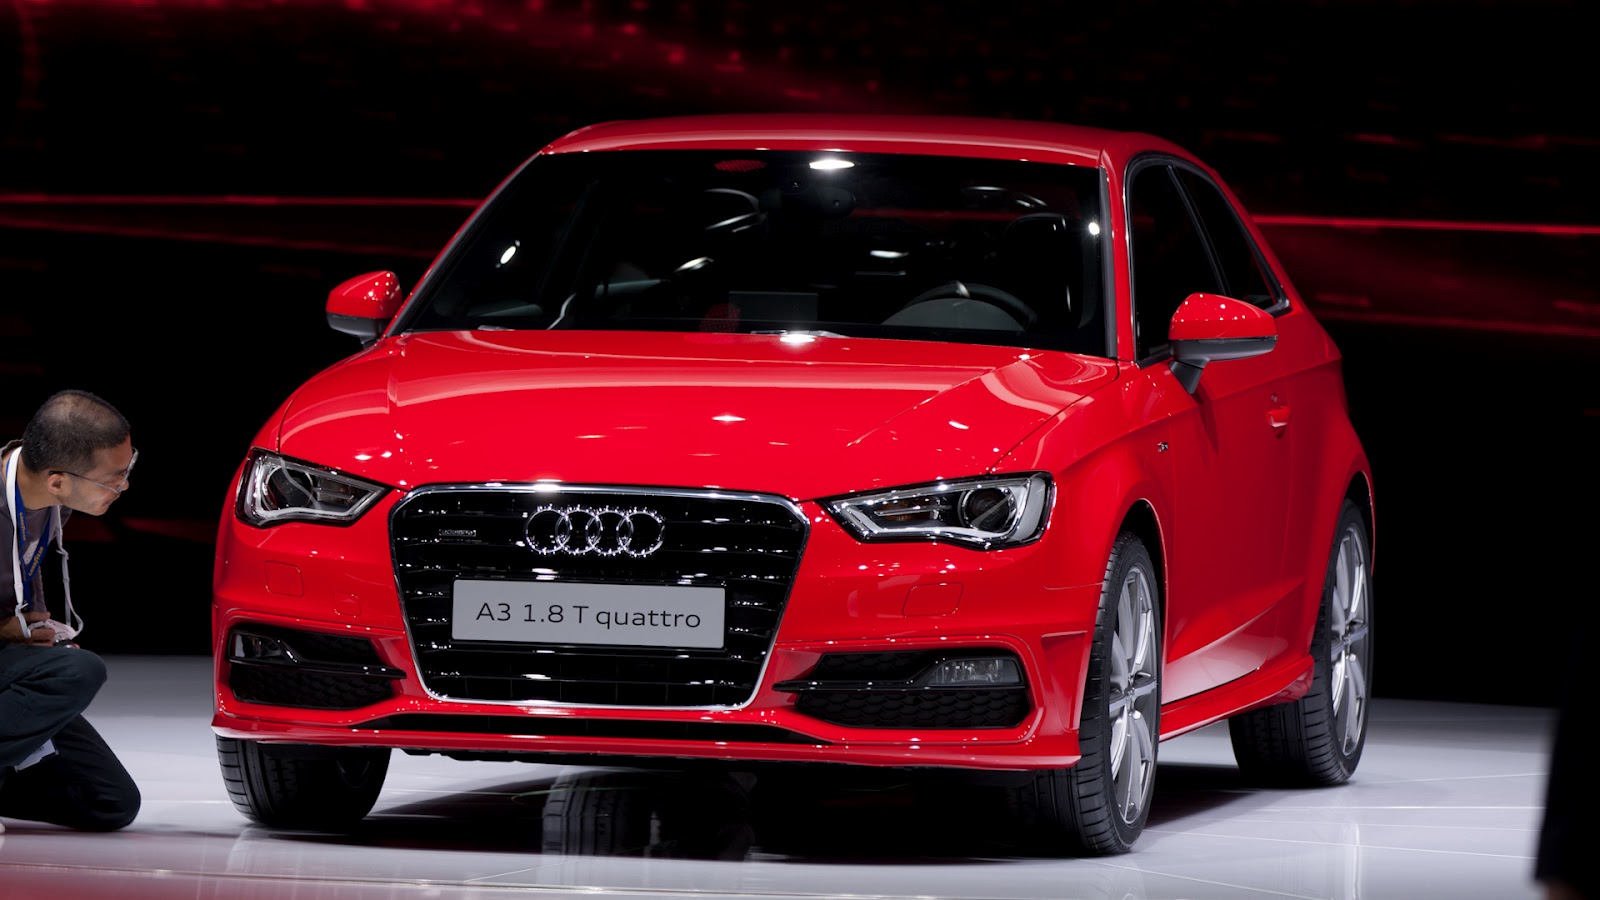 The World of Audi   Audi Forum   News   Prices   Technical